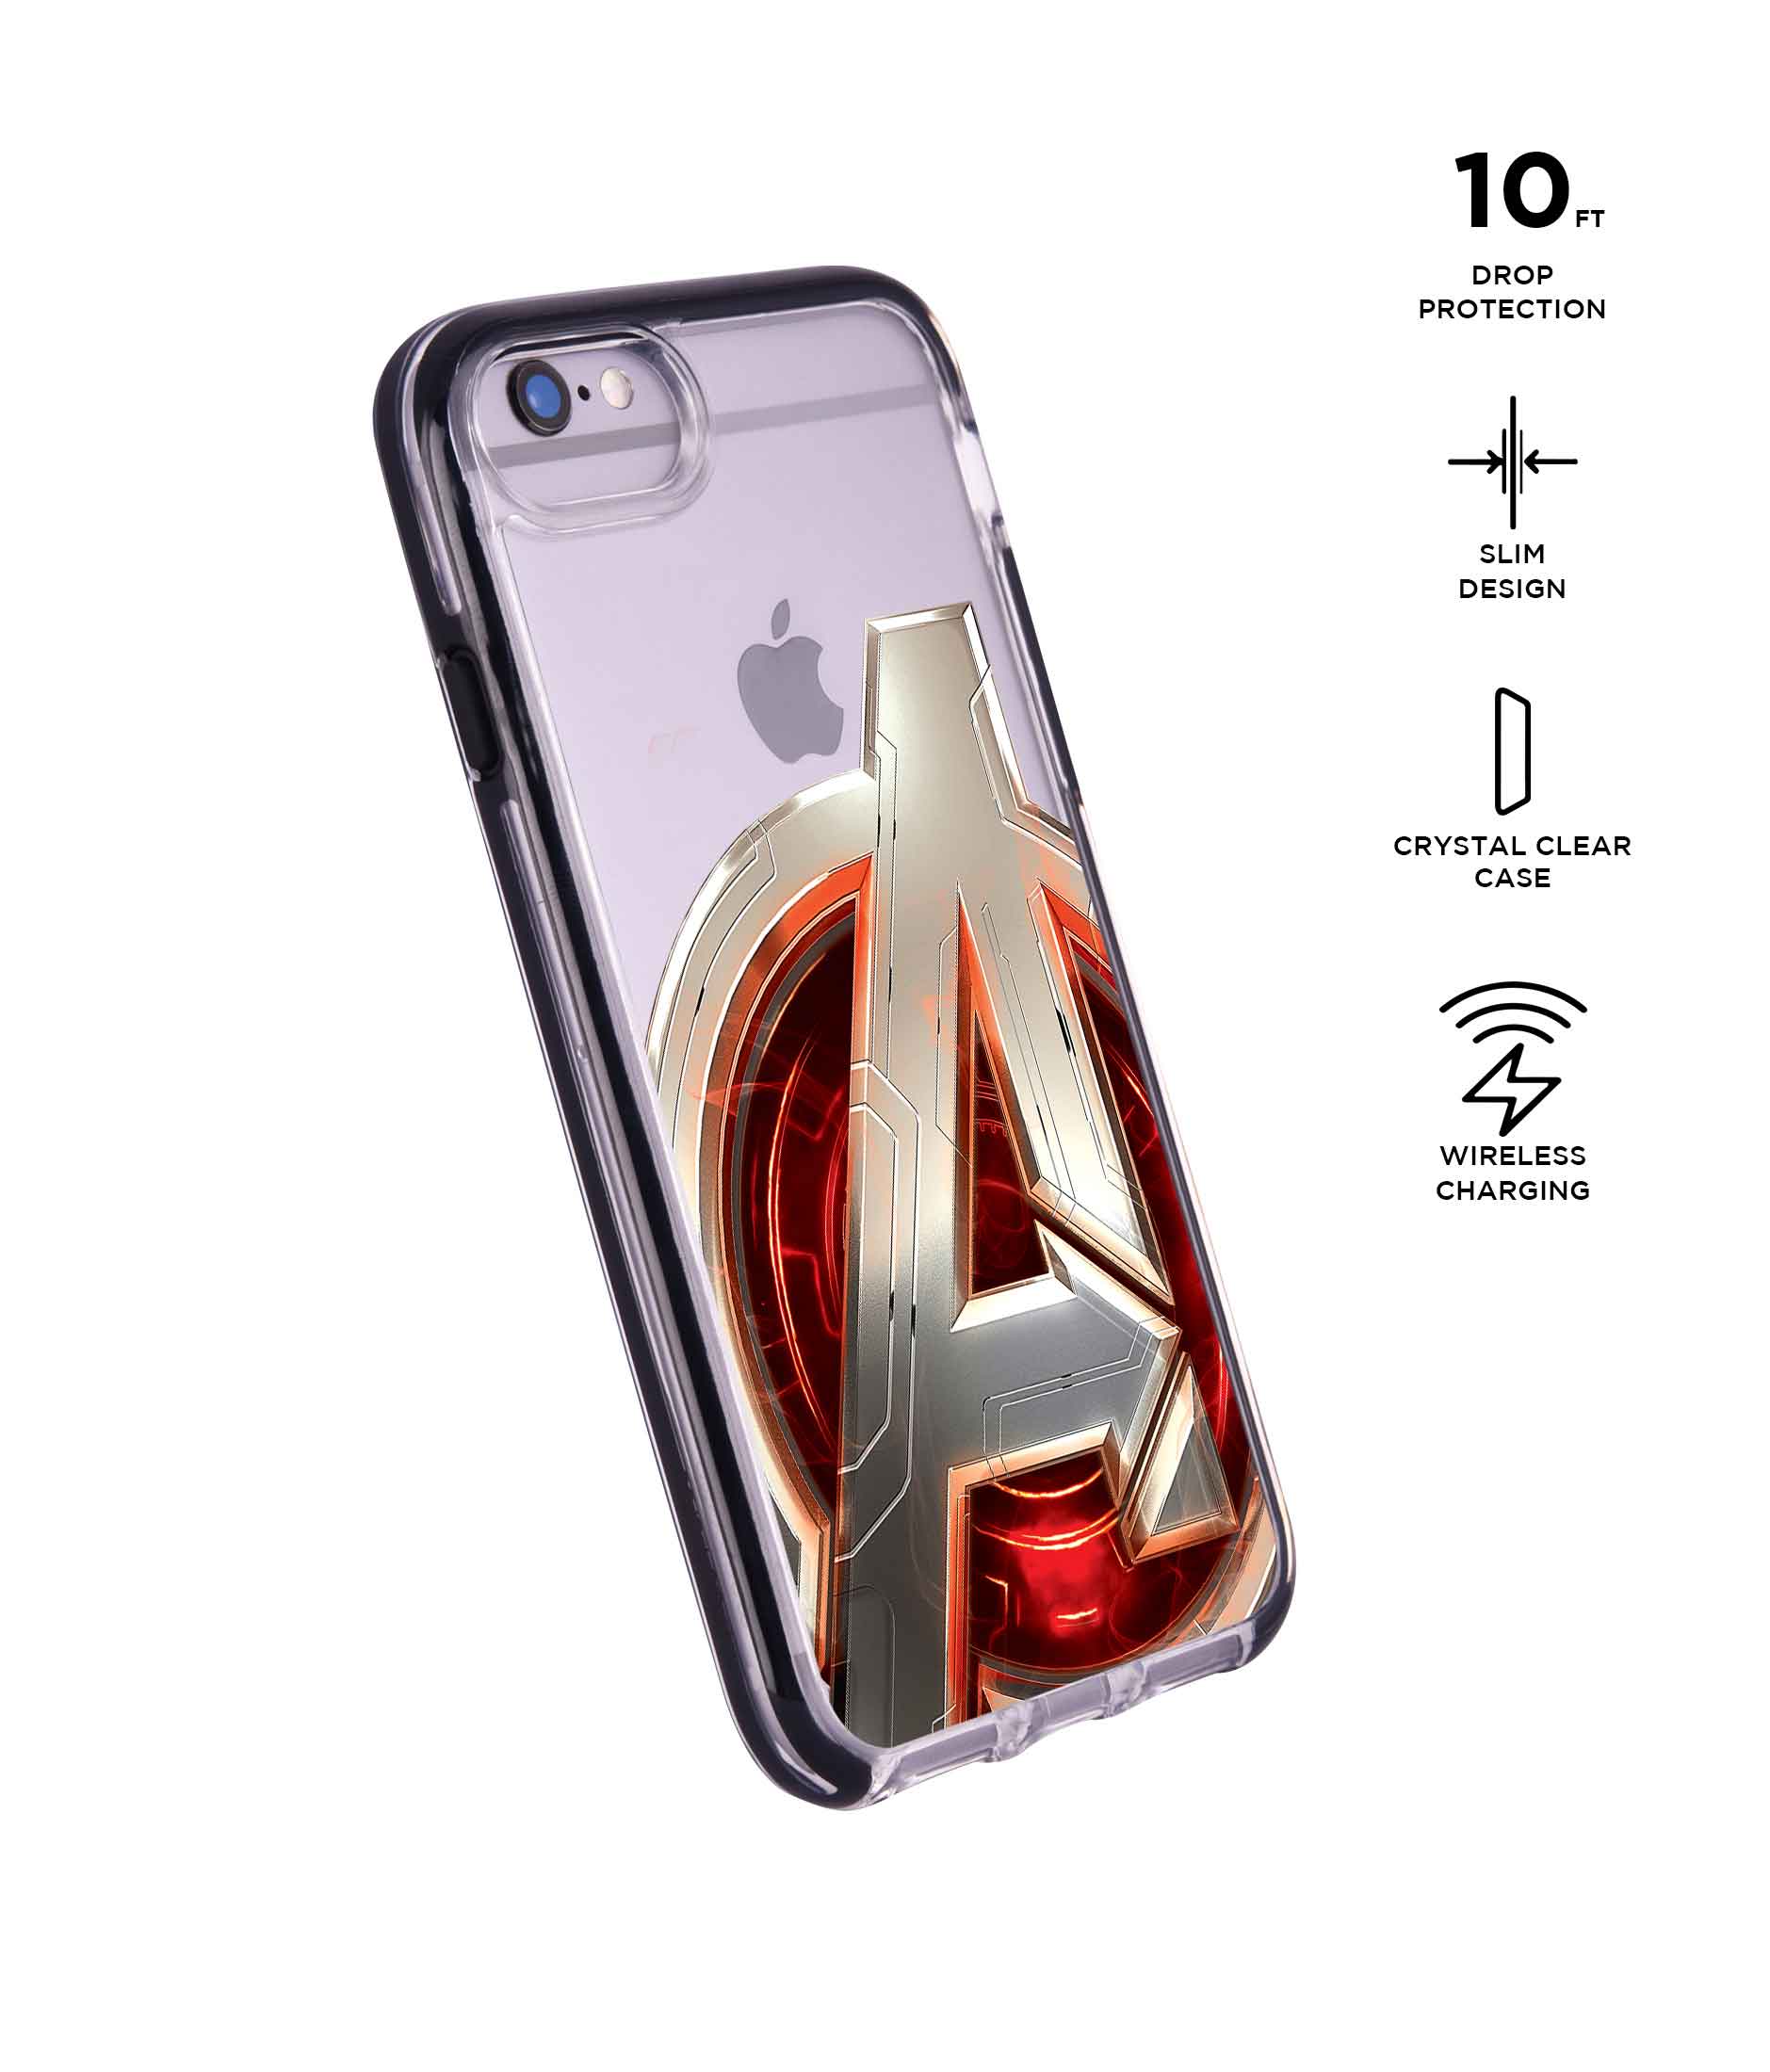 Avengers Version 2 - Extreme Phone Case for iPhone 6